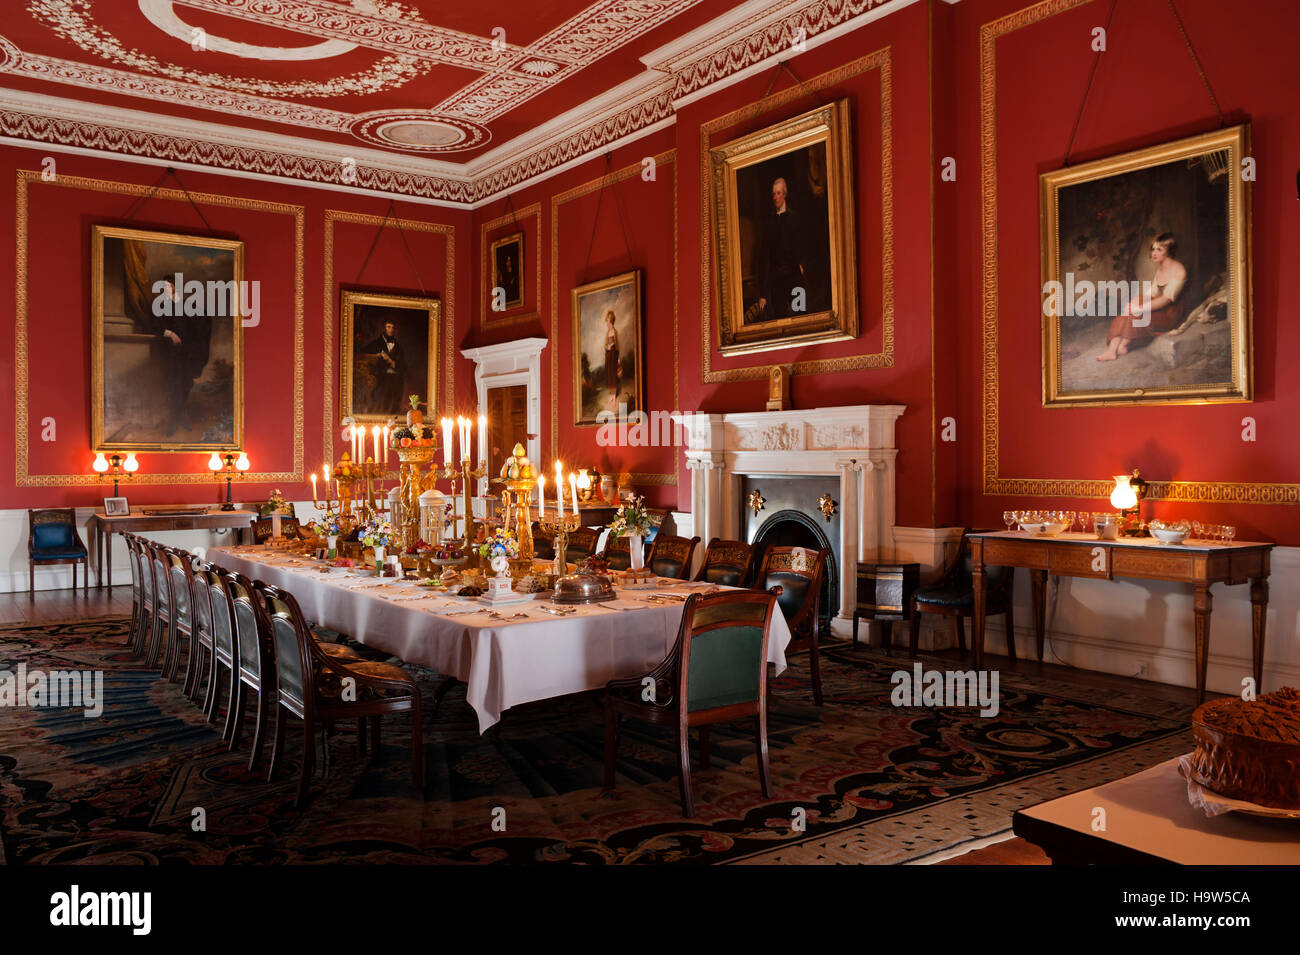 The Dining Room at Attingham Park, Shropshire. The room was designed by George Steuart in the 1780s. Stock Photo